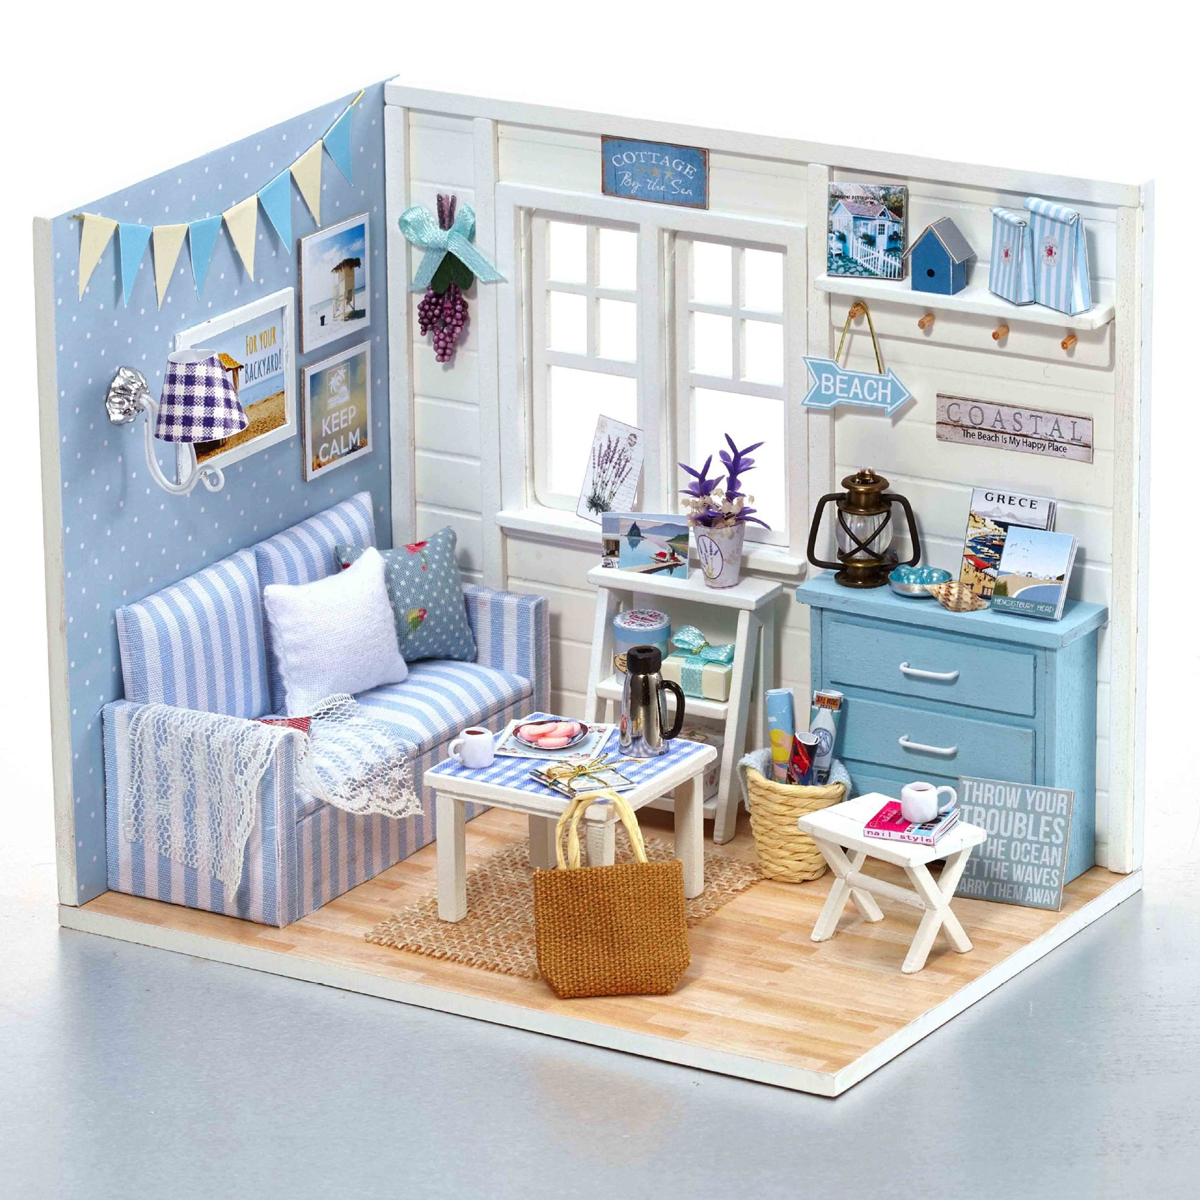 

Doll House Furniture Diy Miniature Dust Cover 3D Wooden Miniaturas Dollhouse Toys for Children Birthday Gifts